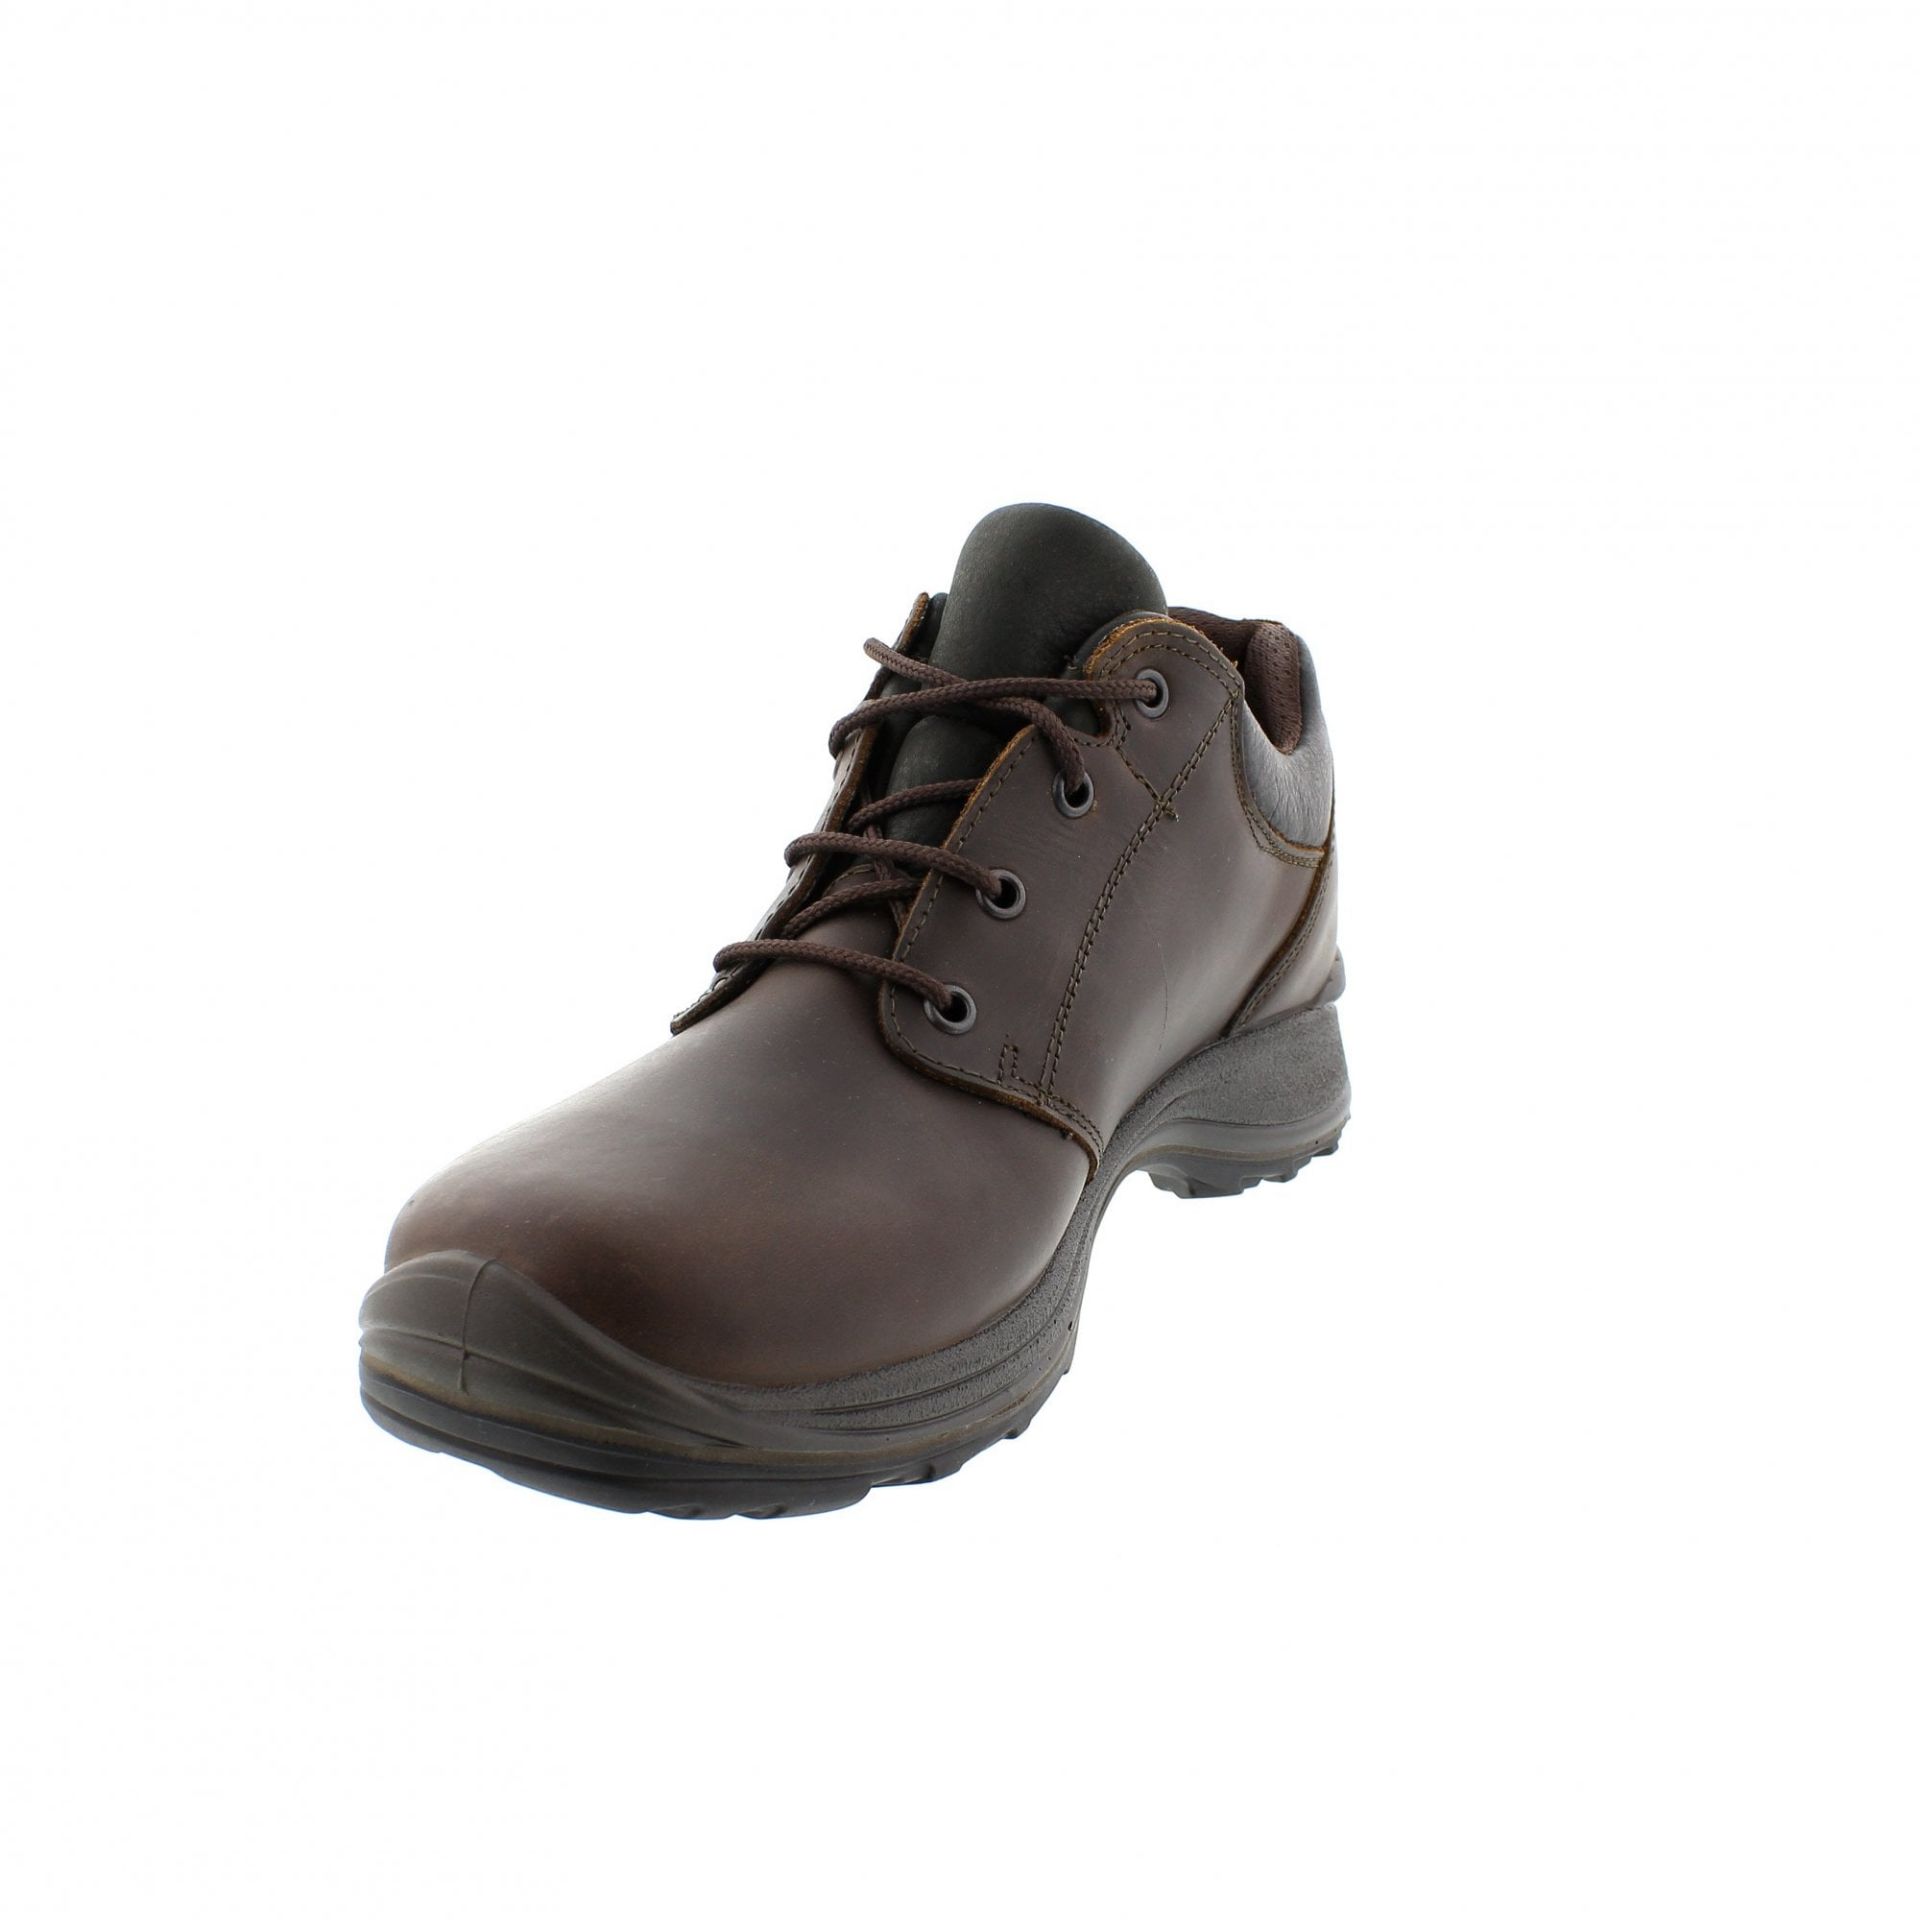 1 x Pair of Men's Grisport Brown Leather GriTex Shoes - Rogerson Footwear - Brand New and Boxed - - Image 2 of 9